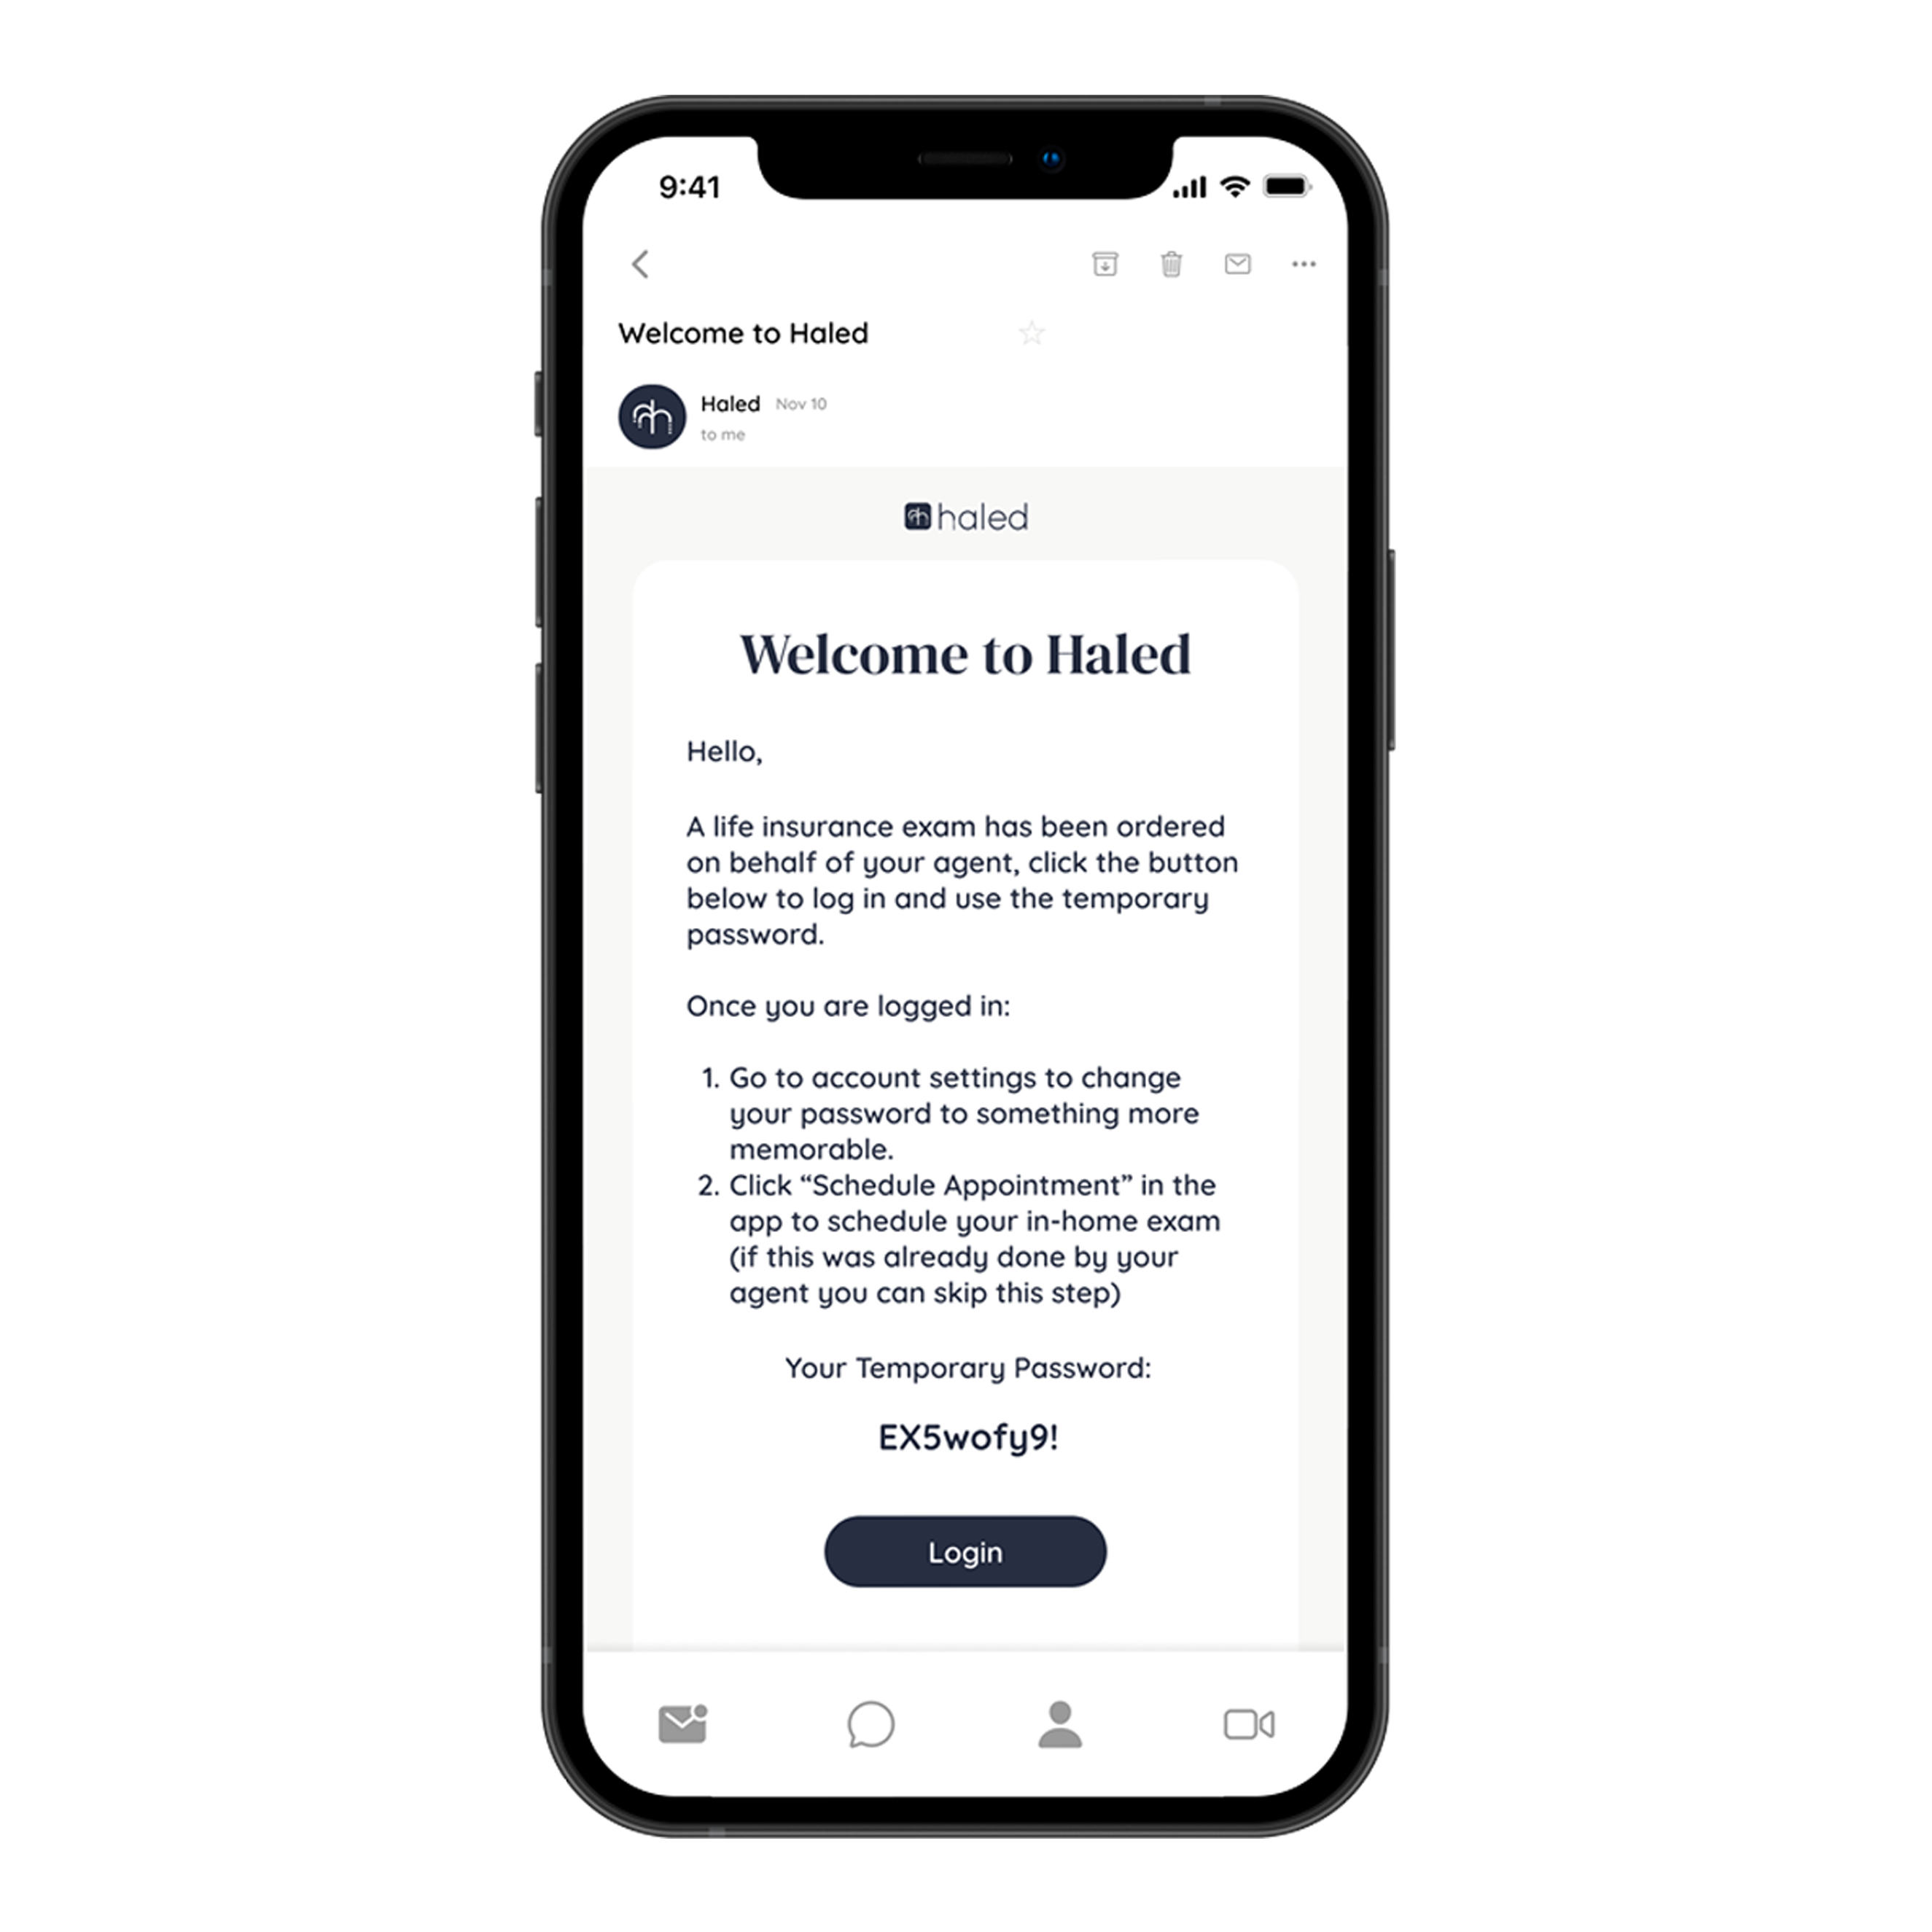 Haled Consumer Welcome Email Mockup UI